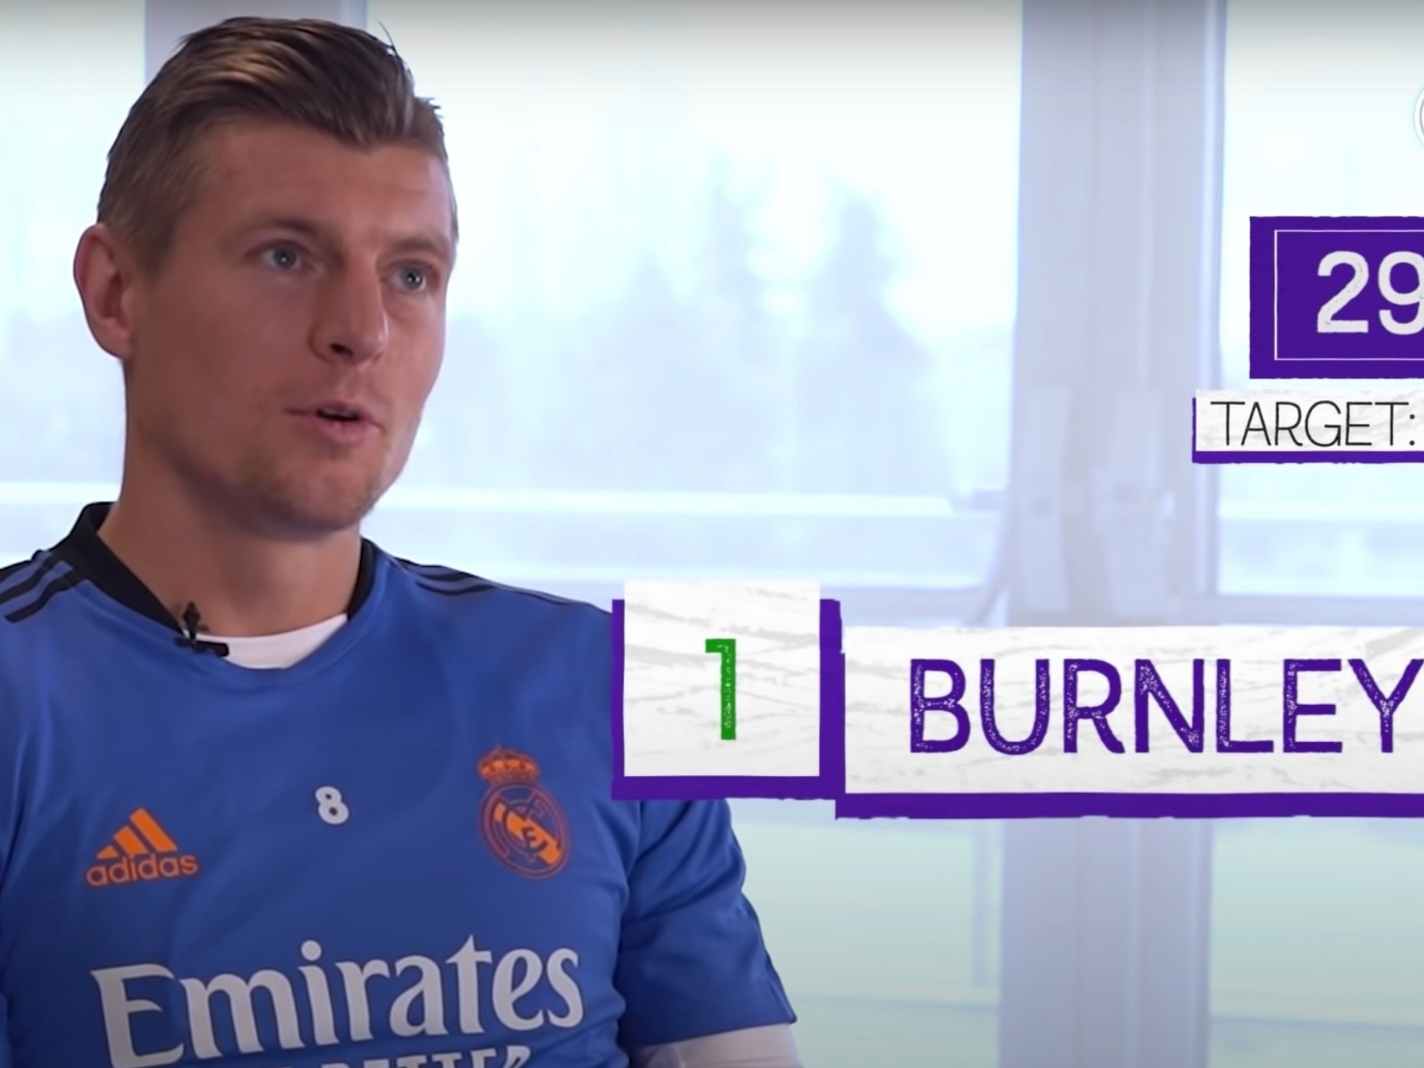 Toni Kroos names Burnley first when asked to name PL teams in quiz